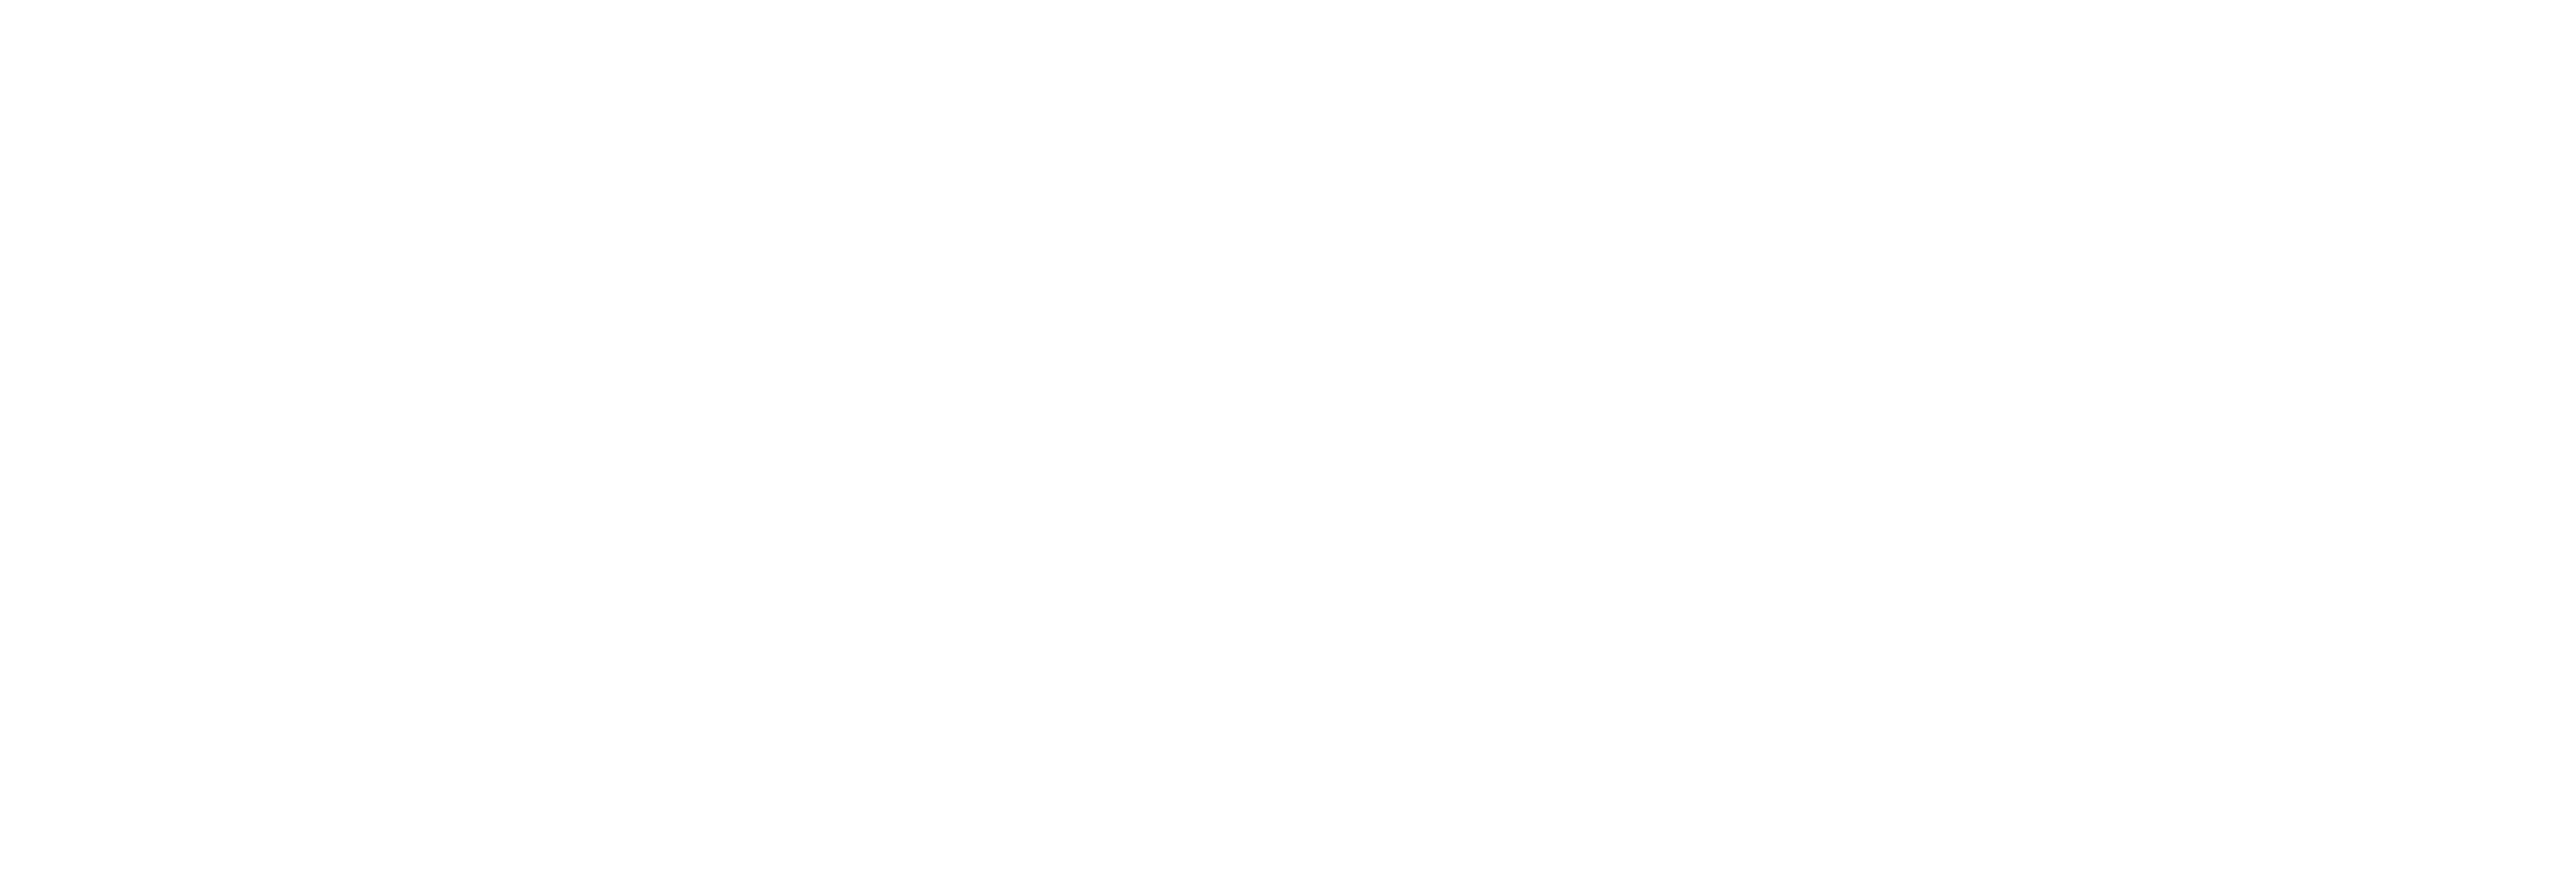 mimic android app